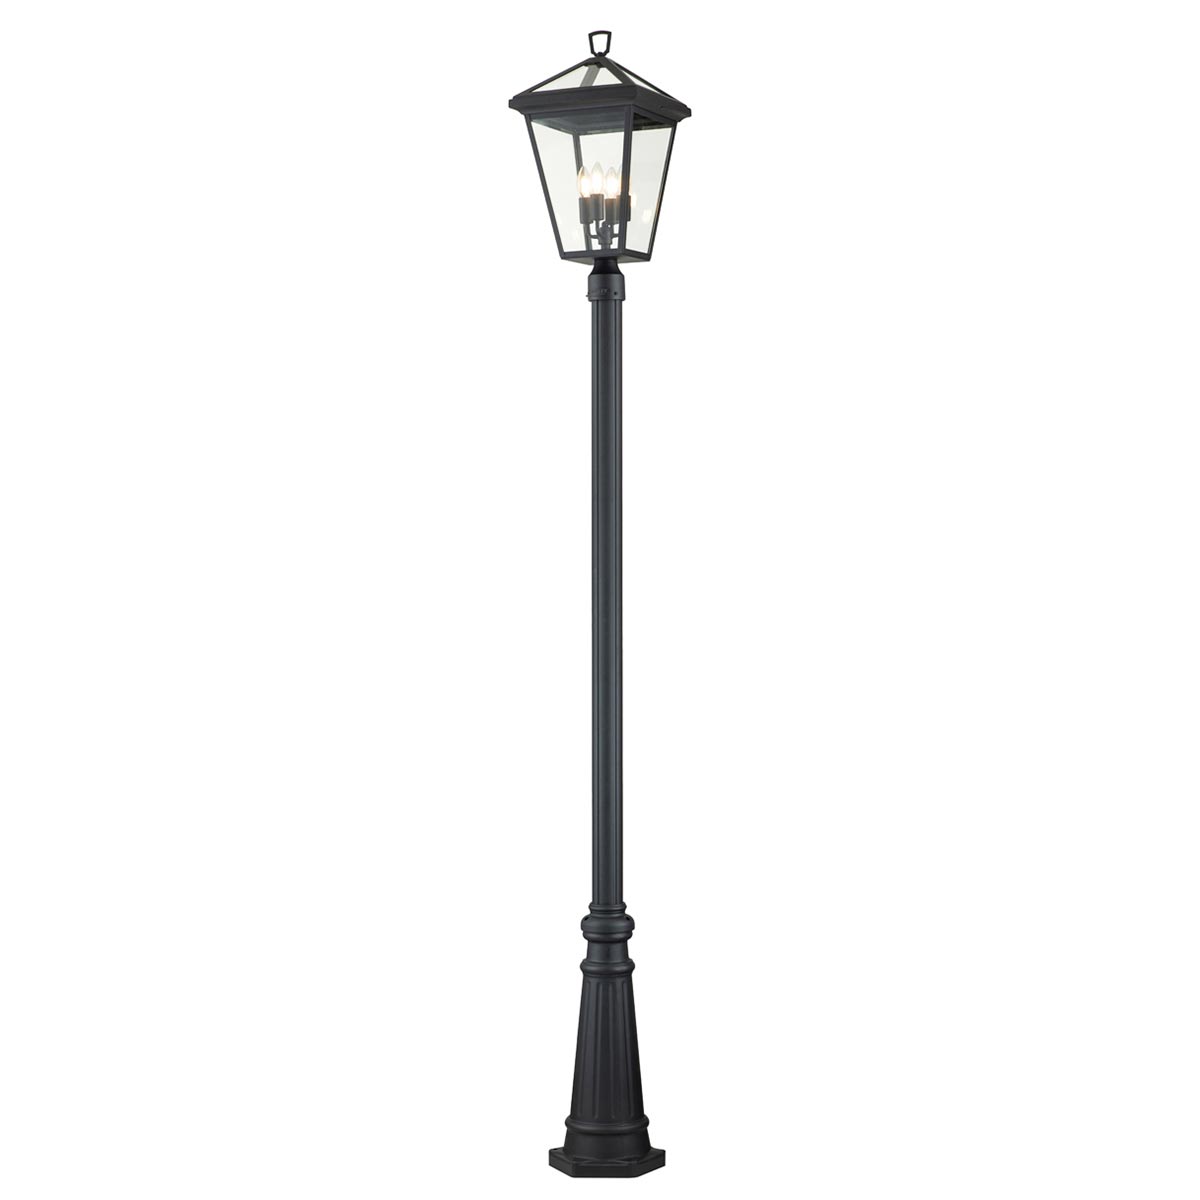 Quintiesse Alford Place 4 Light Outdoor Lamp Post Lantern Museum Black